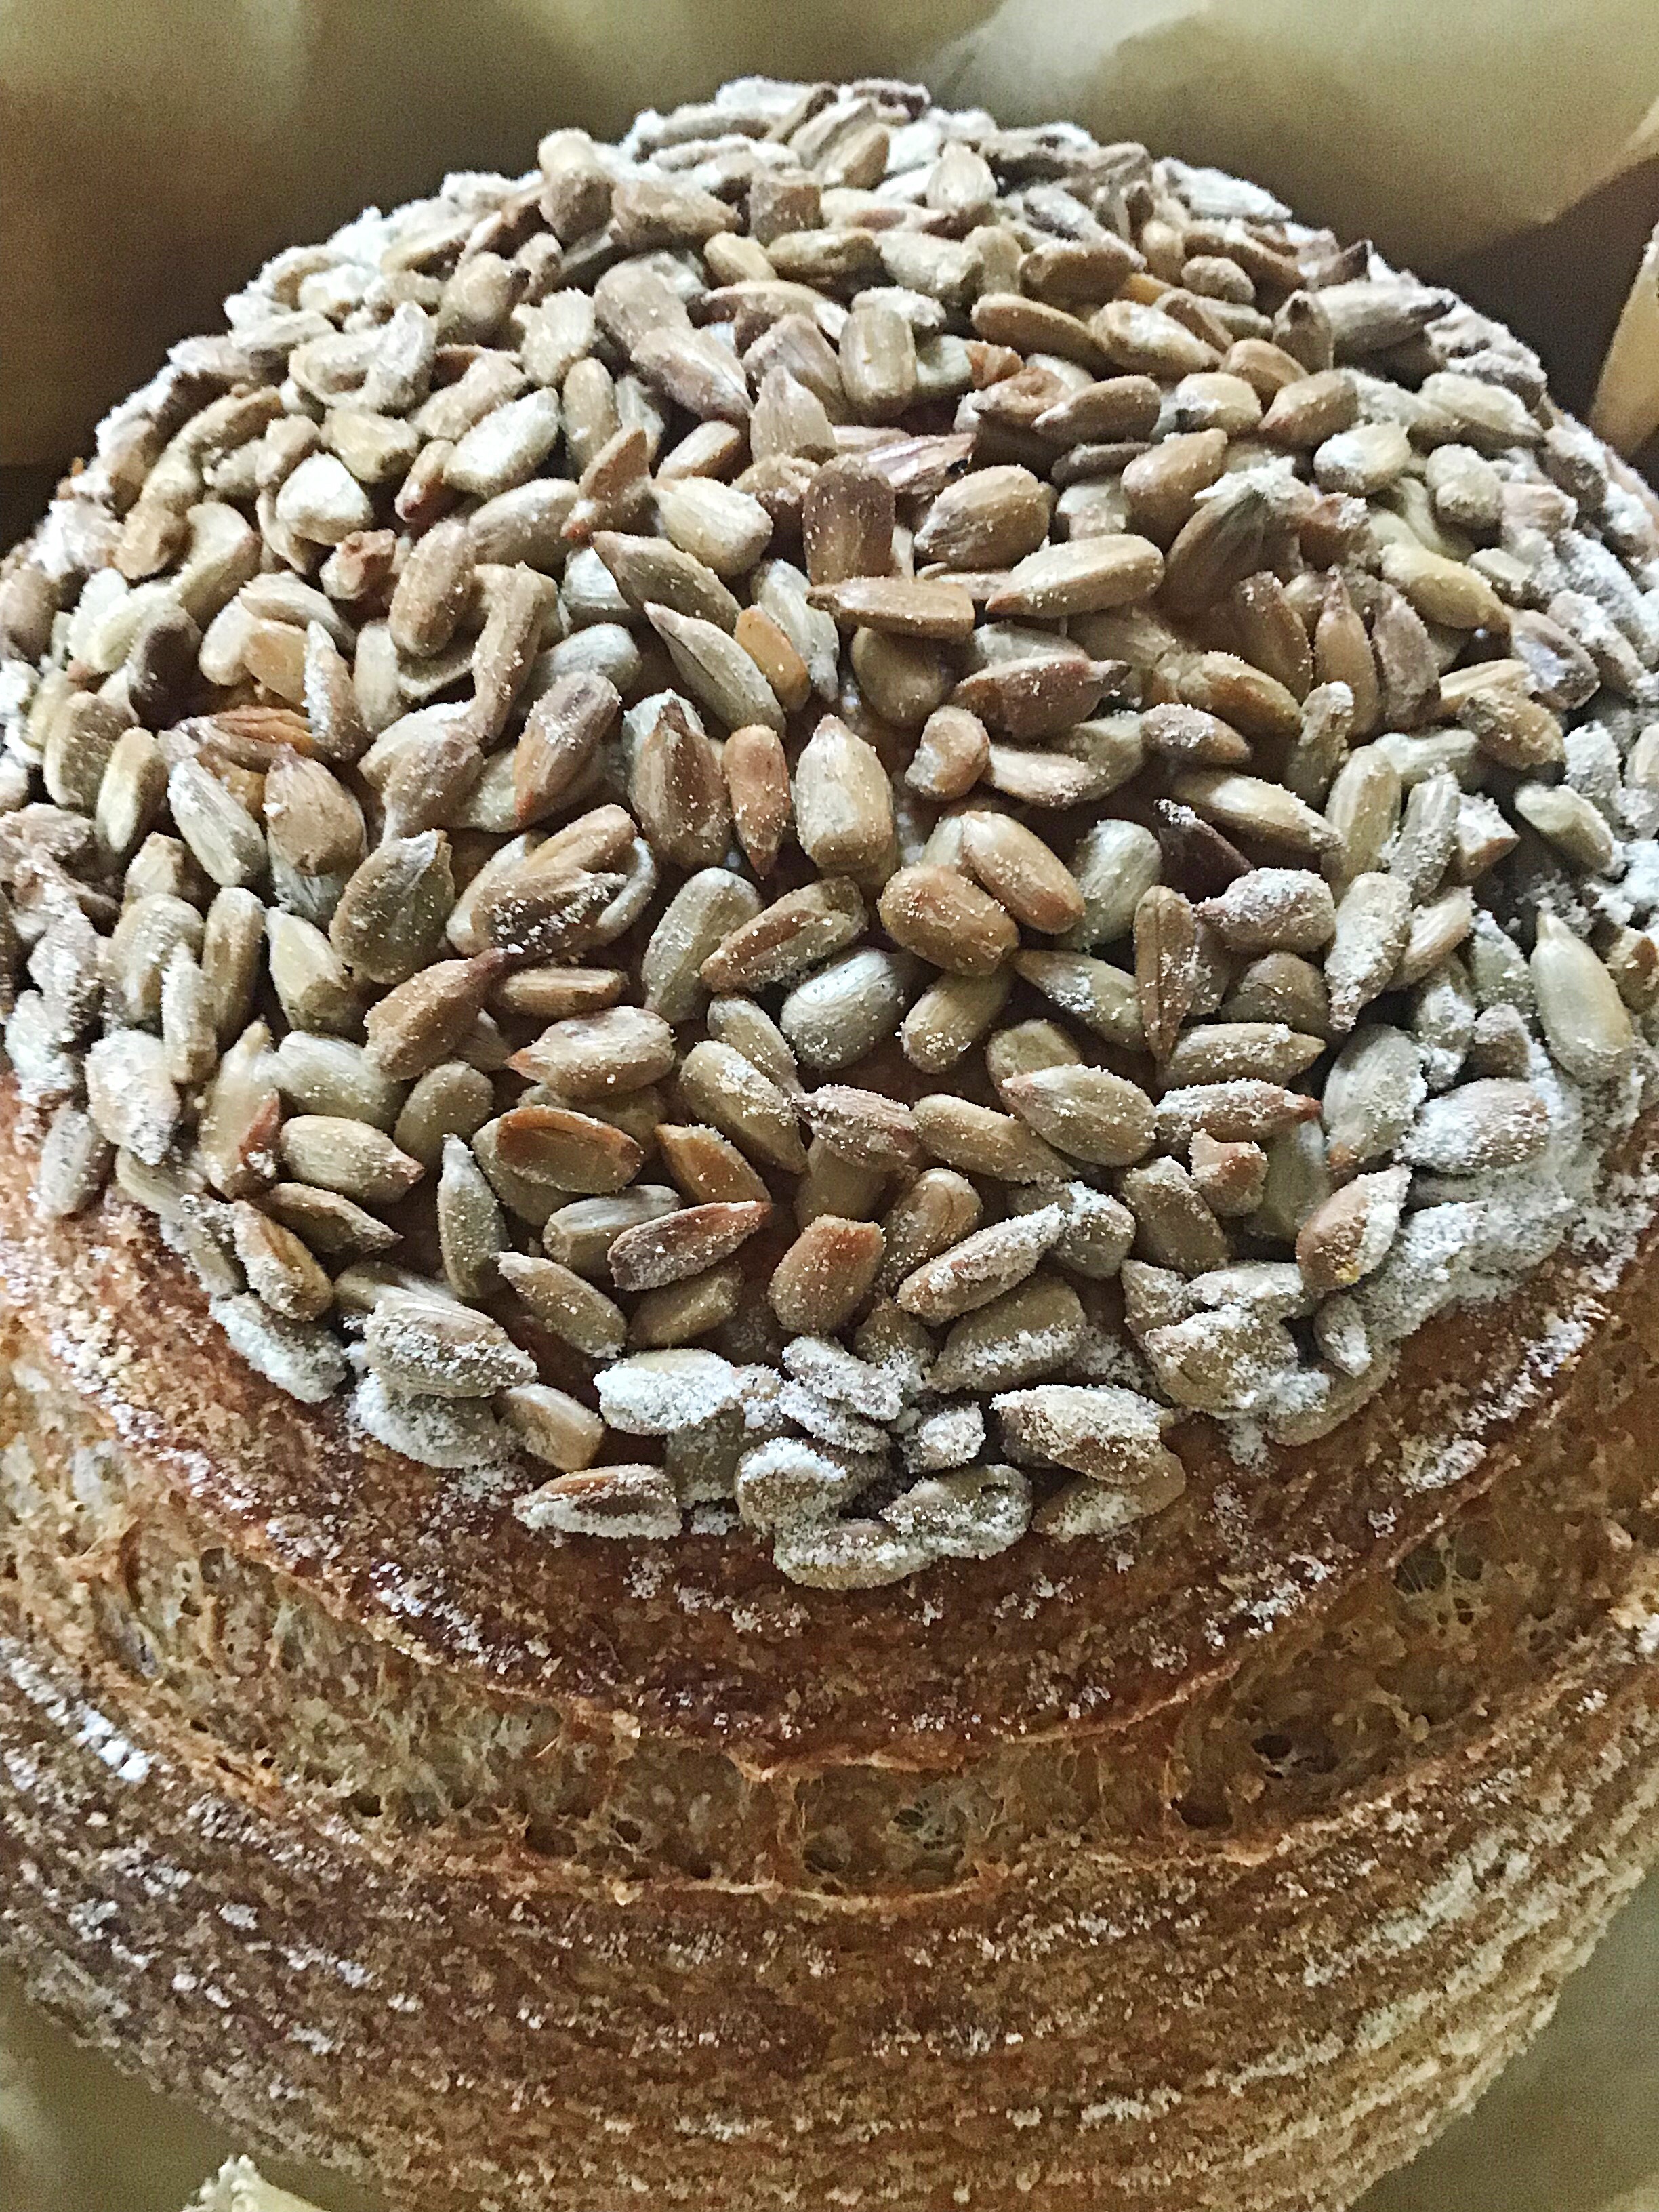 A cake with nuts on top of it.